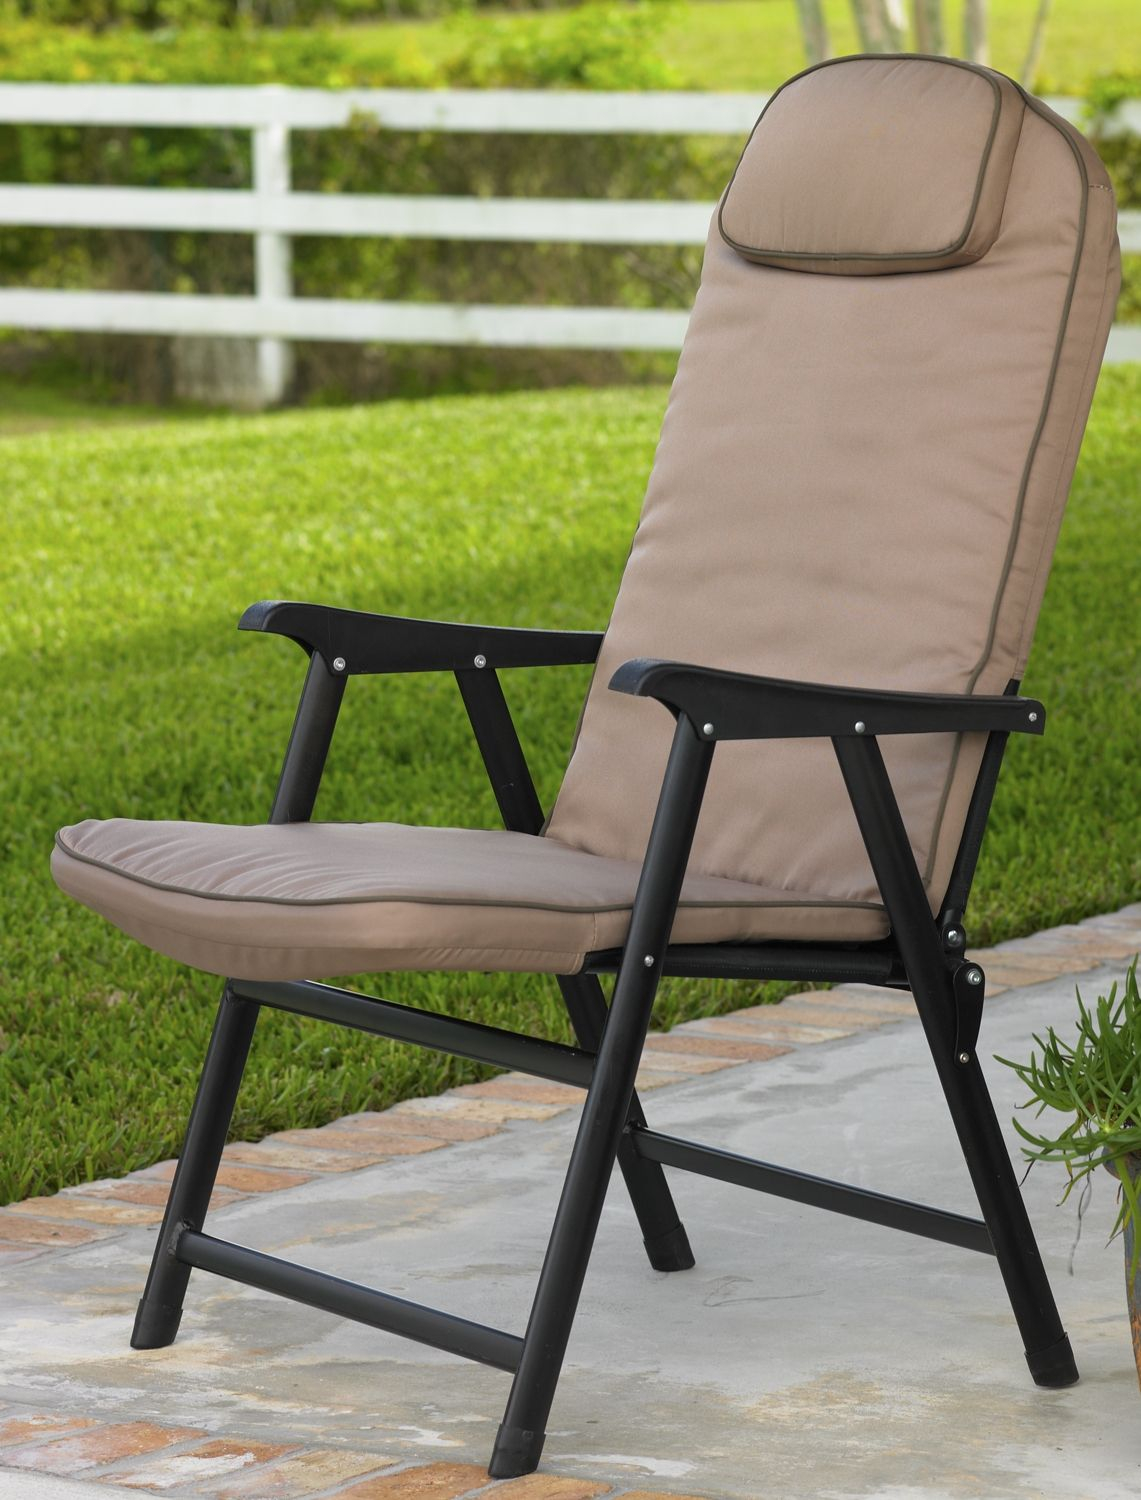 Extra Wide Folding Padded Outdoor Chair Outdoor Folding Within Dimensions 1141 X 1500 